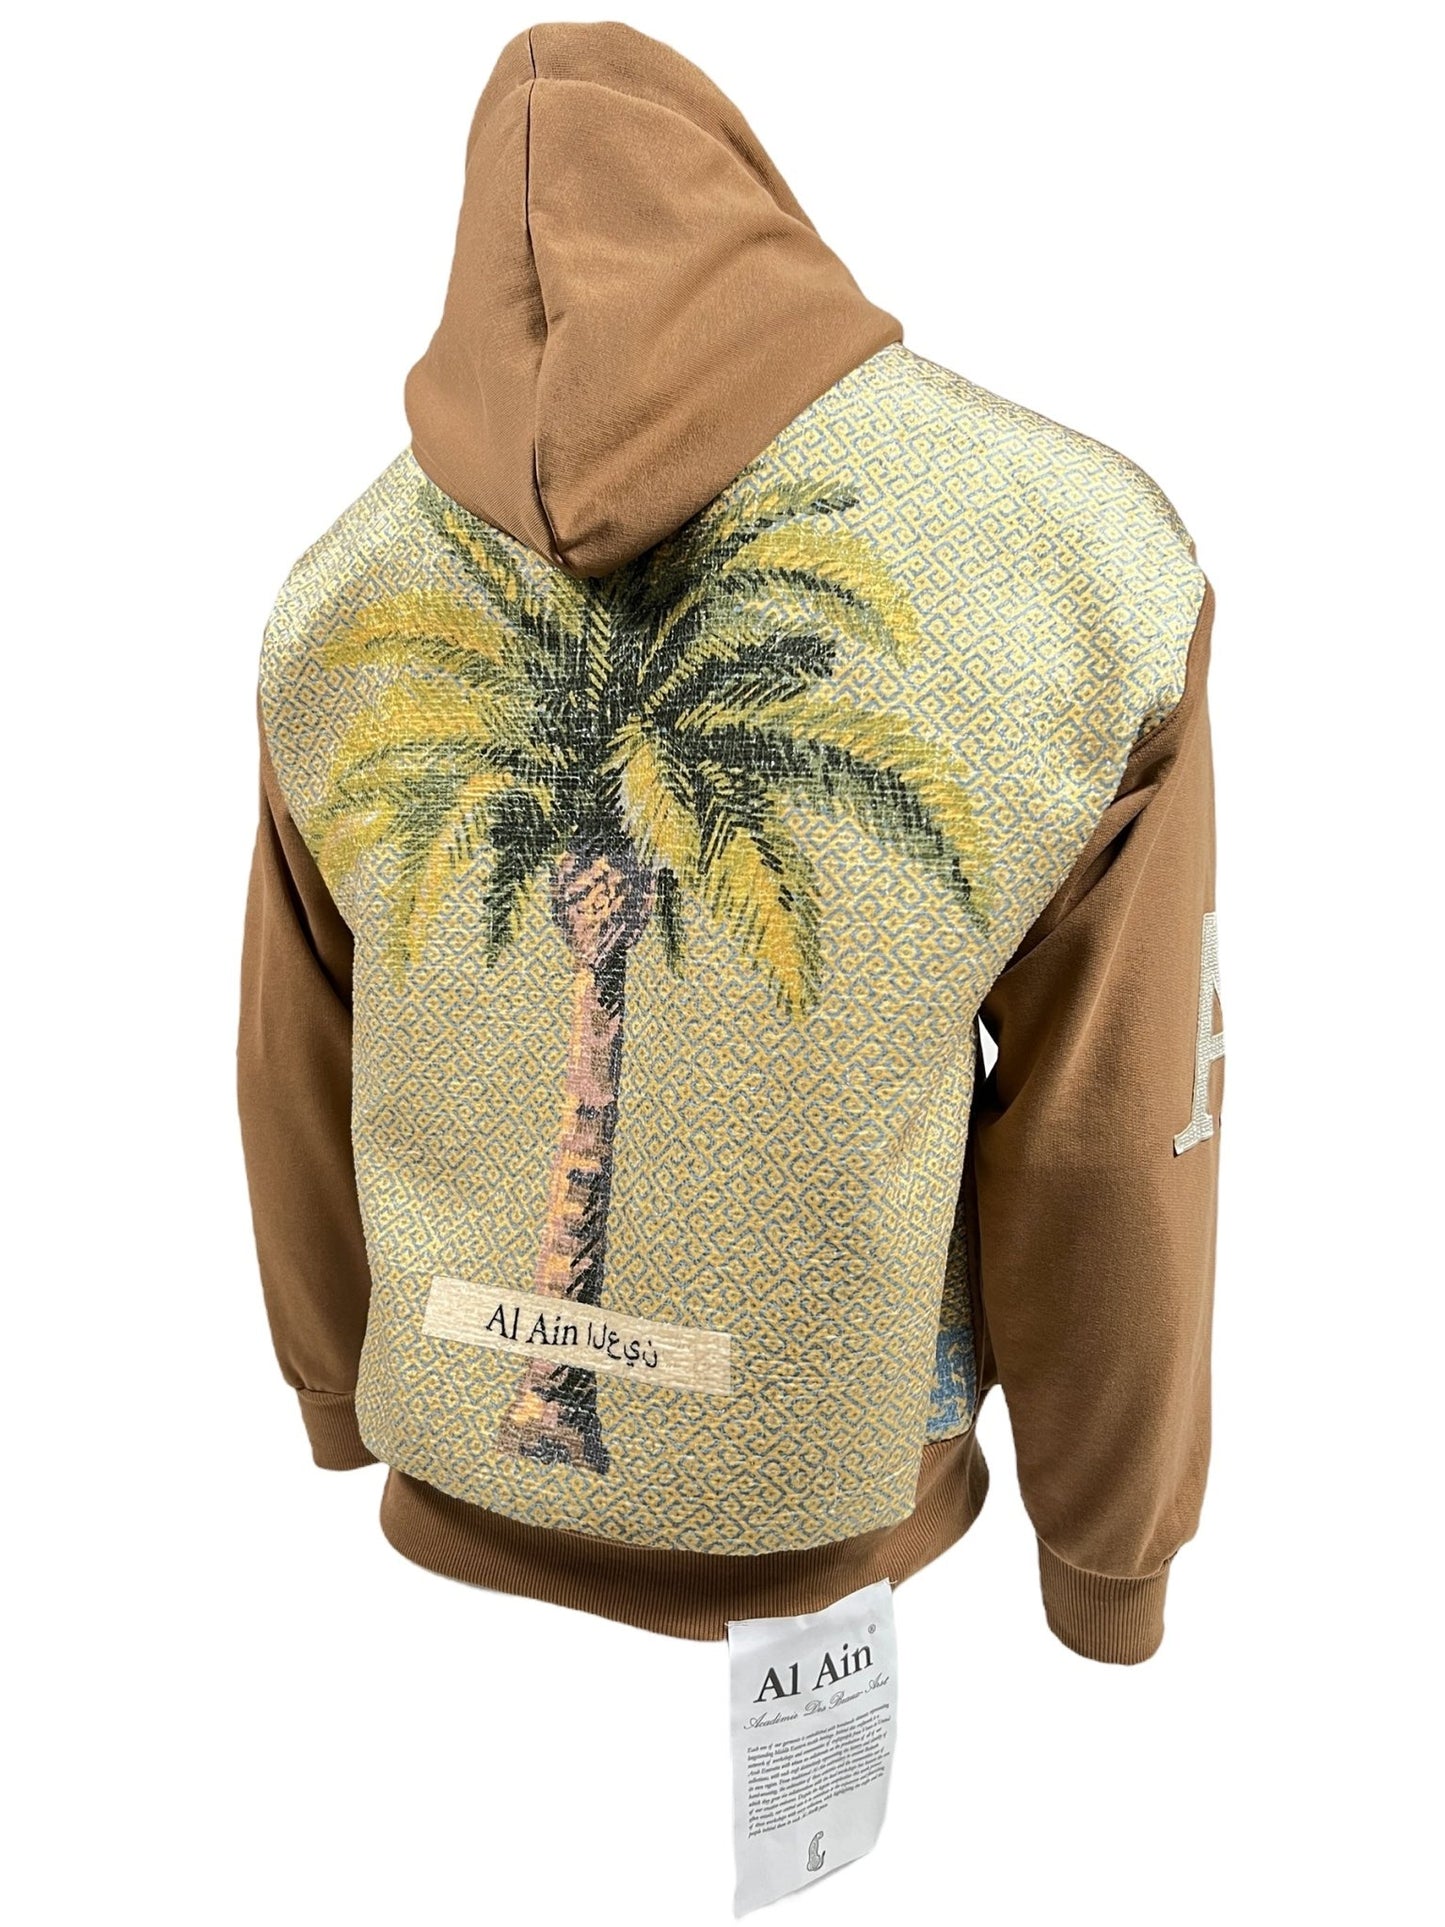 A brown hoodie featuring a large palm tree design and Arabic text on the graphic back. A tag with text hangs from the bottom, perfect for streetwear enthusiasts. Introducing the AL AIN AHOX S102 PALMIER CHAMEAU by AL AIN.